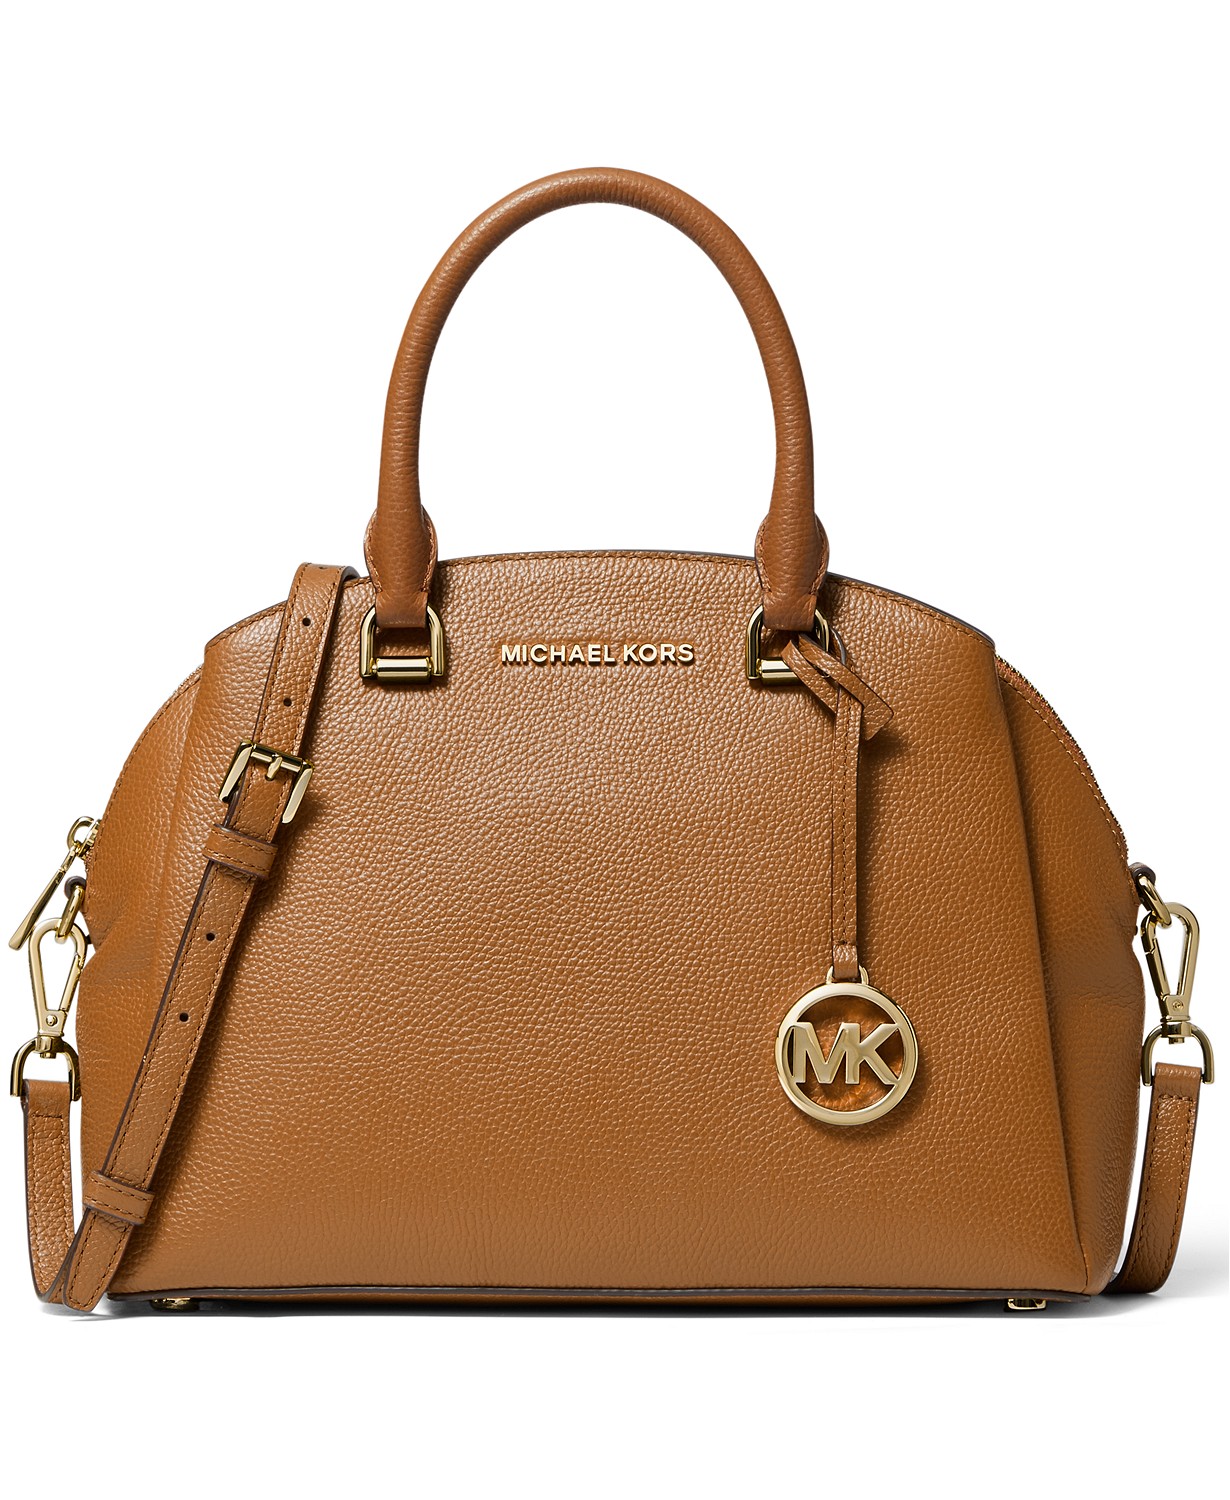 Michael Kors Save up to 25 on full price items